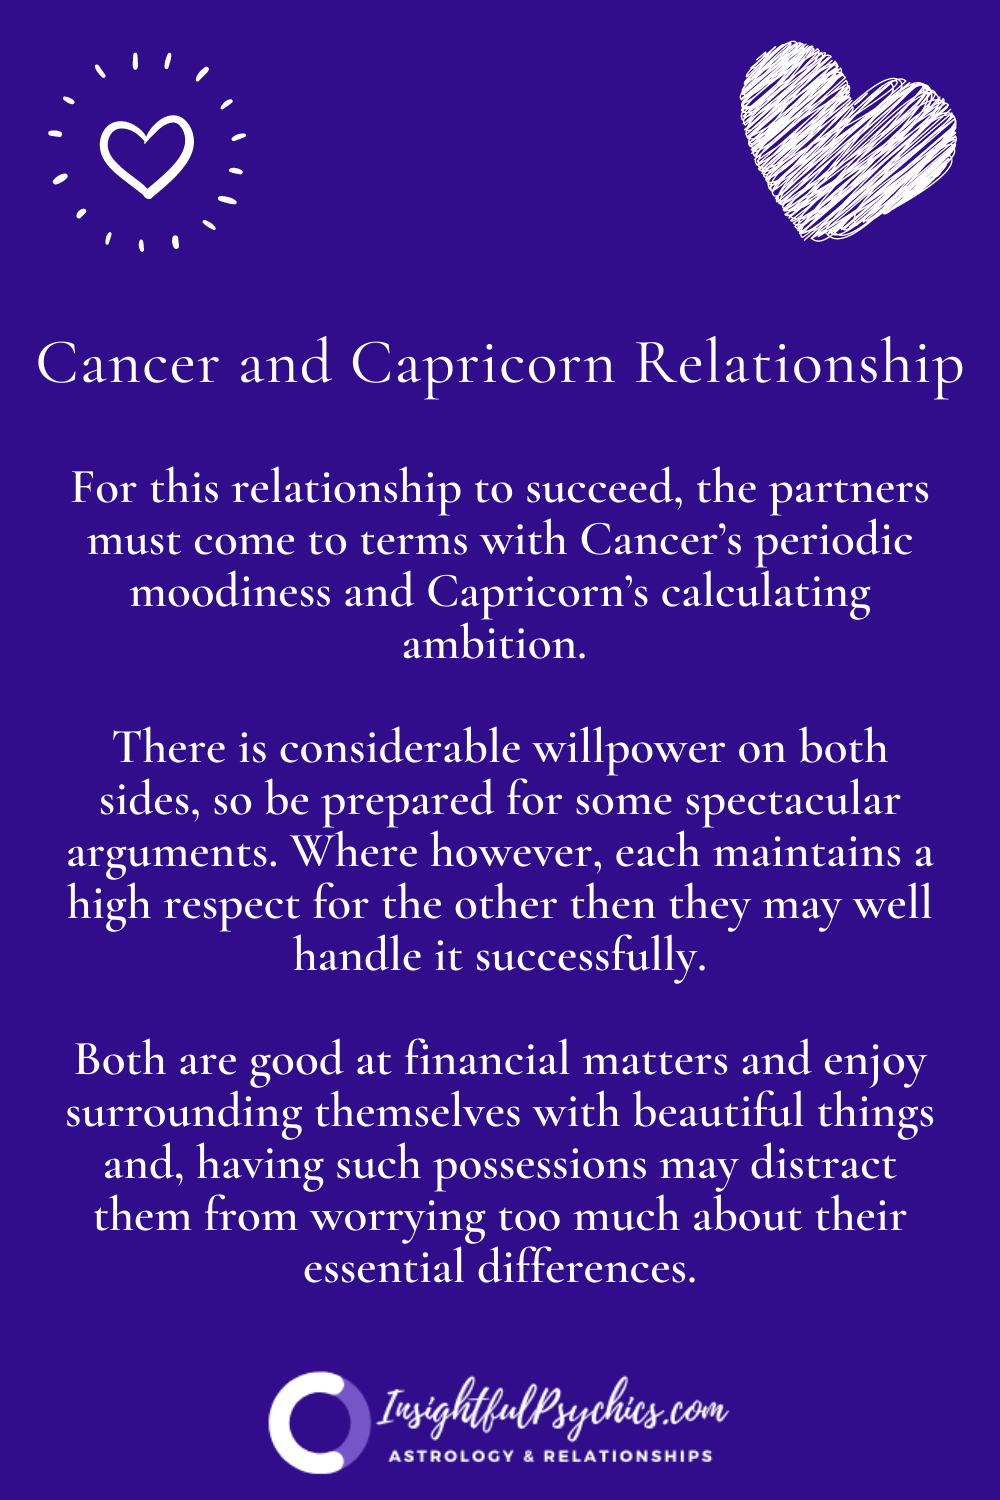 Capricorn and Cancer Compatibility: Sex, Love, and Friendship